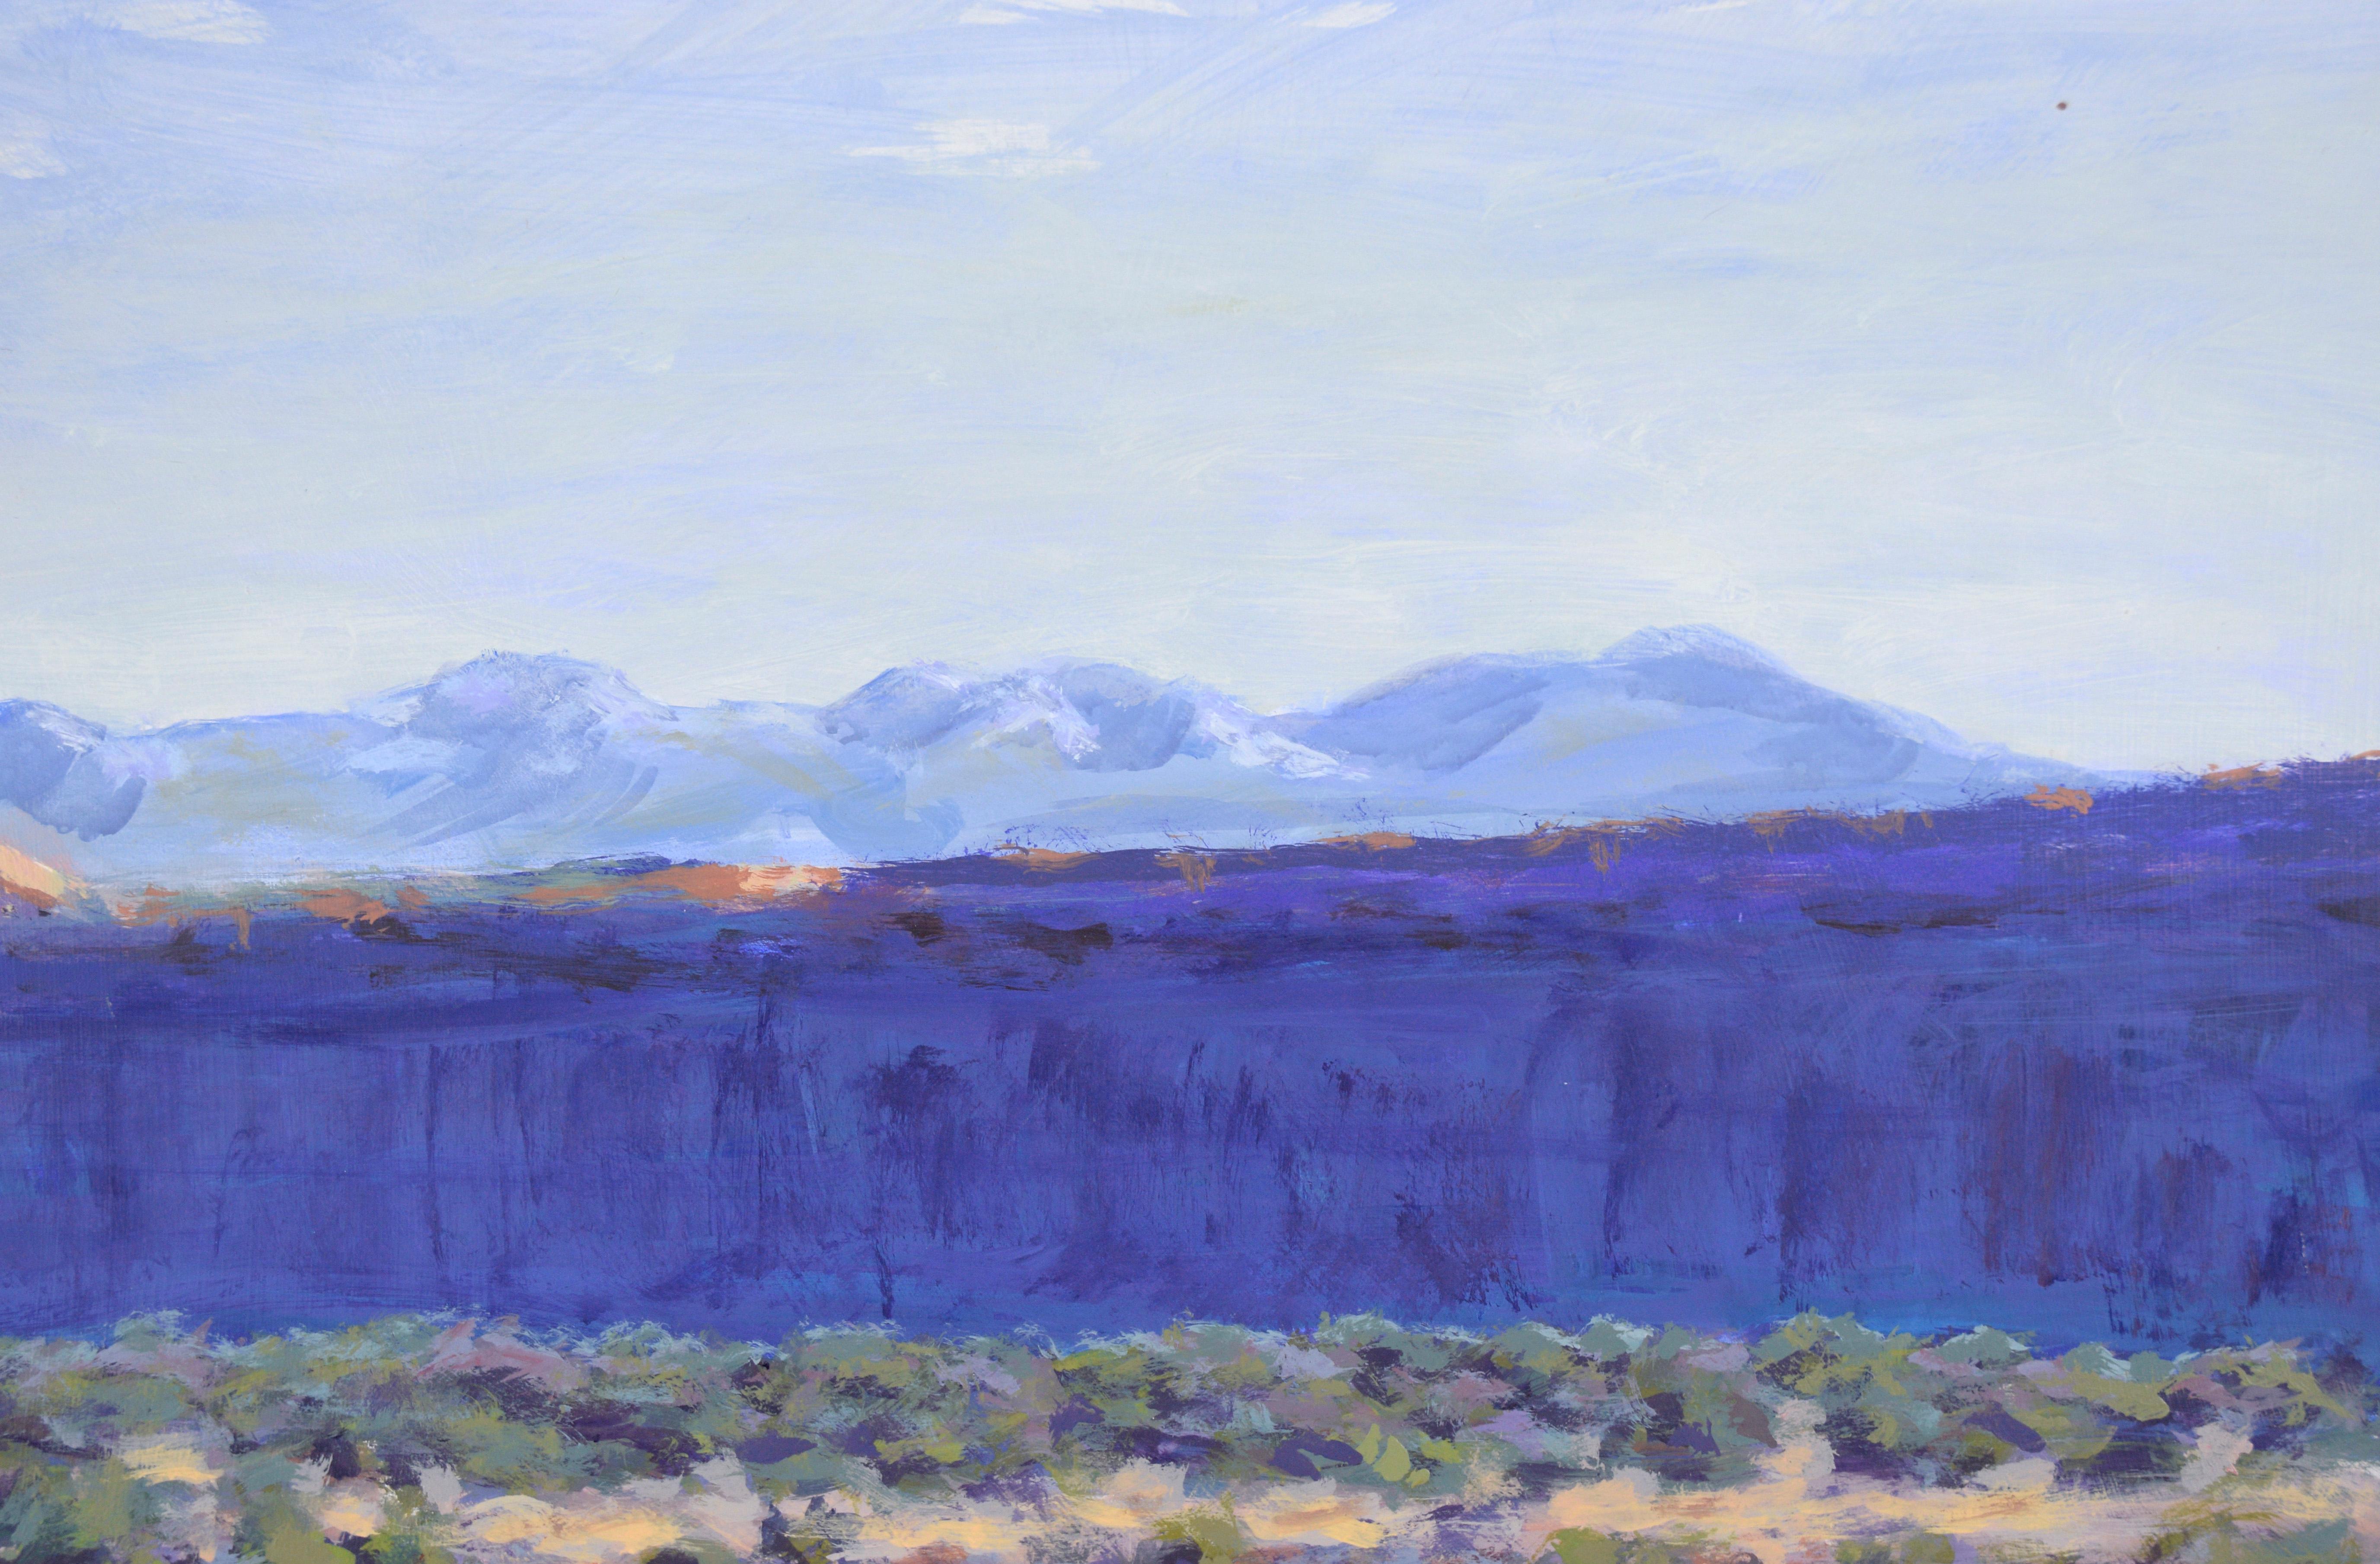 Canyonland - Western Plein Aire Landscape Acrylic on Board

Expansive Western landscape by California Plein Aire artist Nick White (American, 1943-2009). The desert stretches out towards a line of mountain cliffs, with canyons and scrub brush